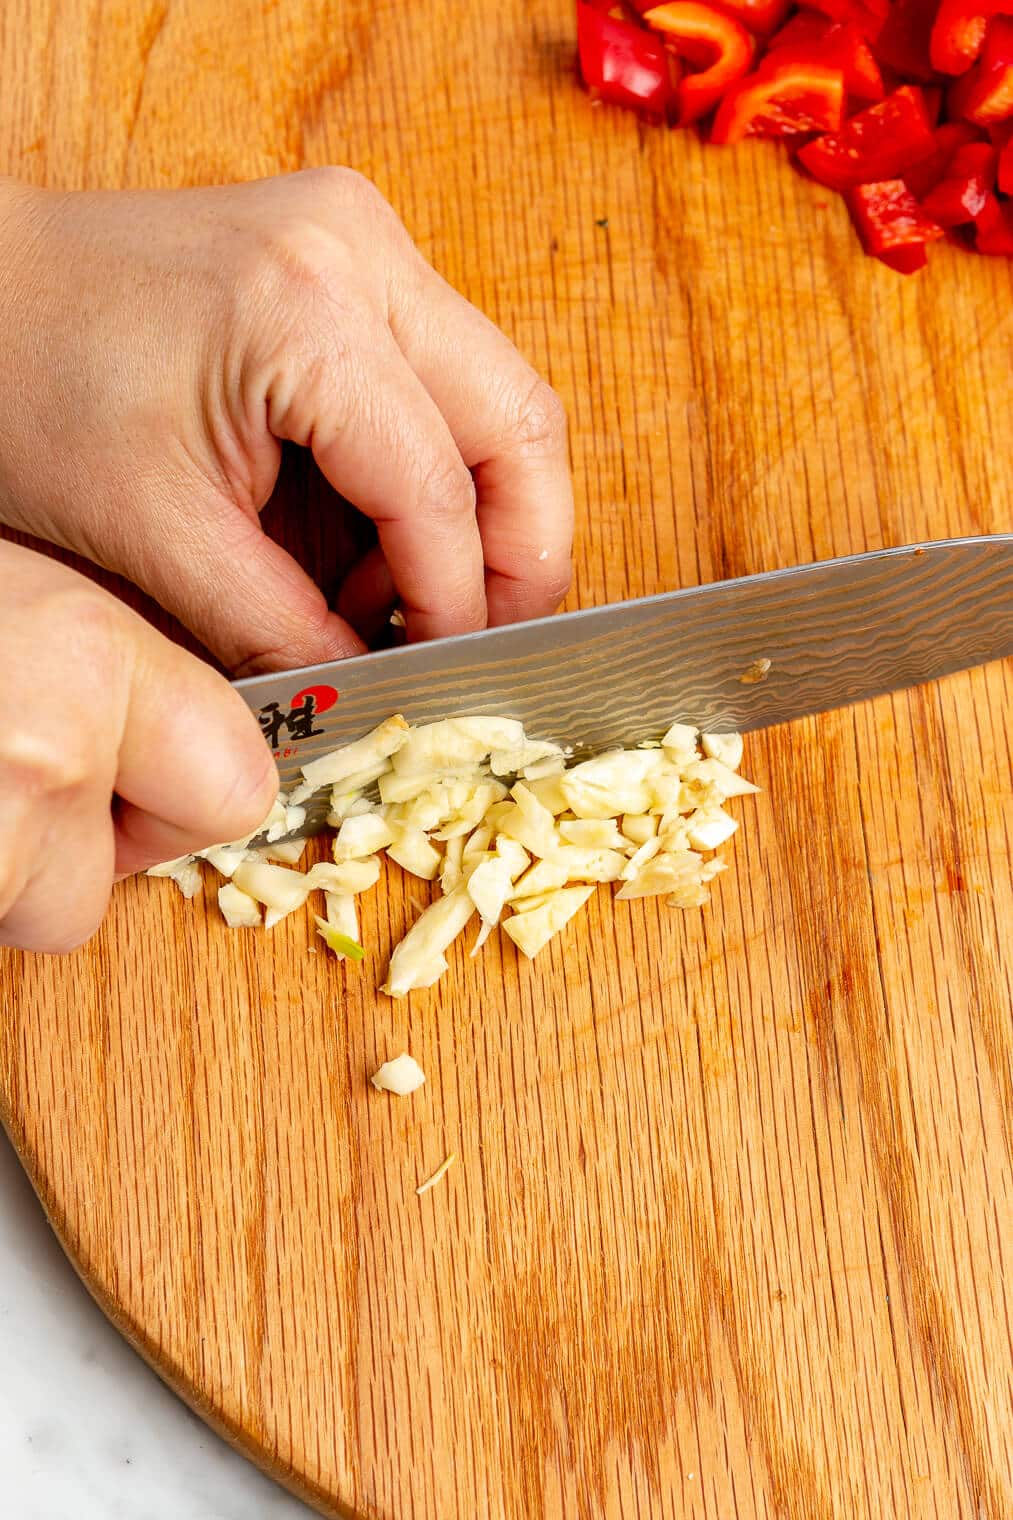 Hand mincing garlic with a chef's knife on a wooden cutting board.